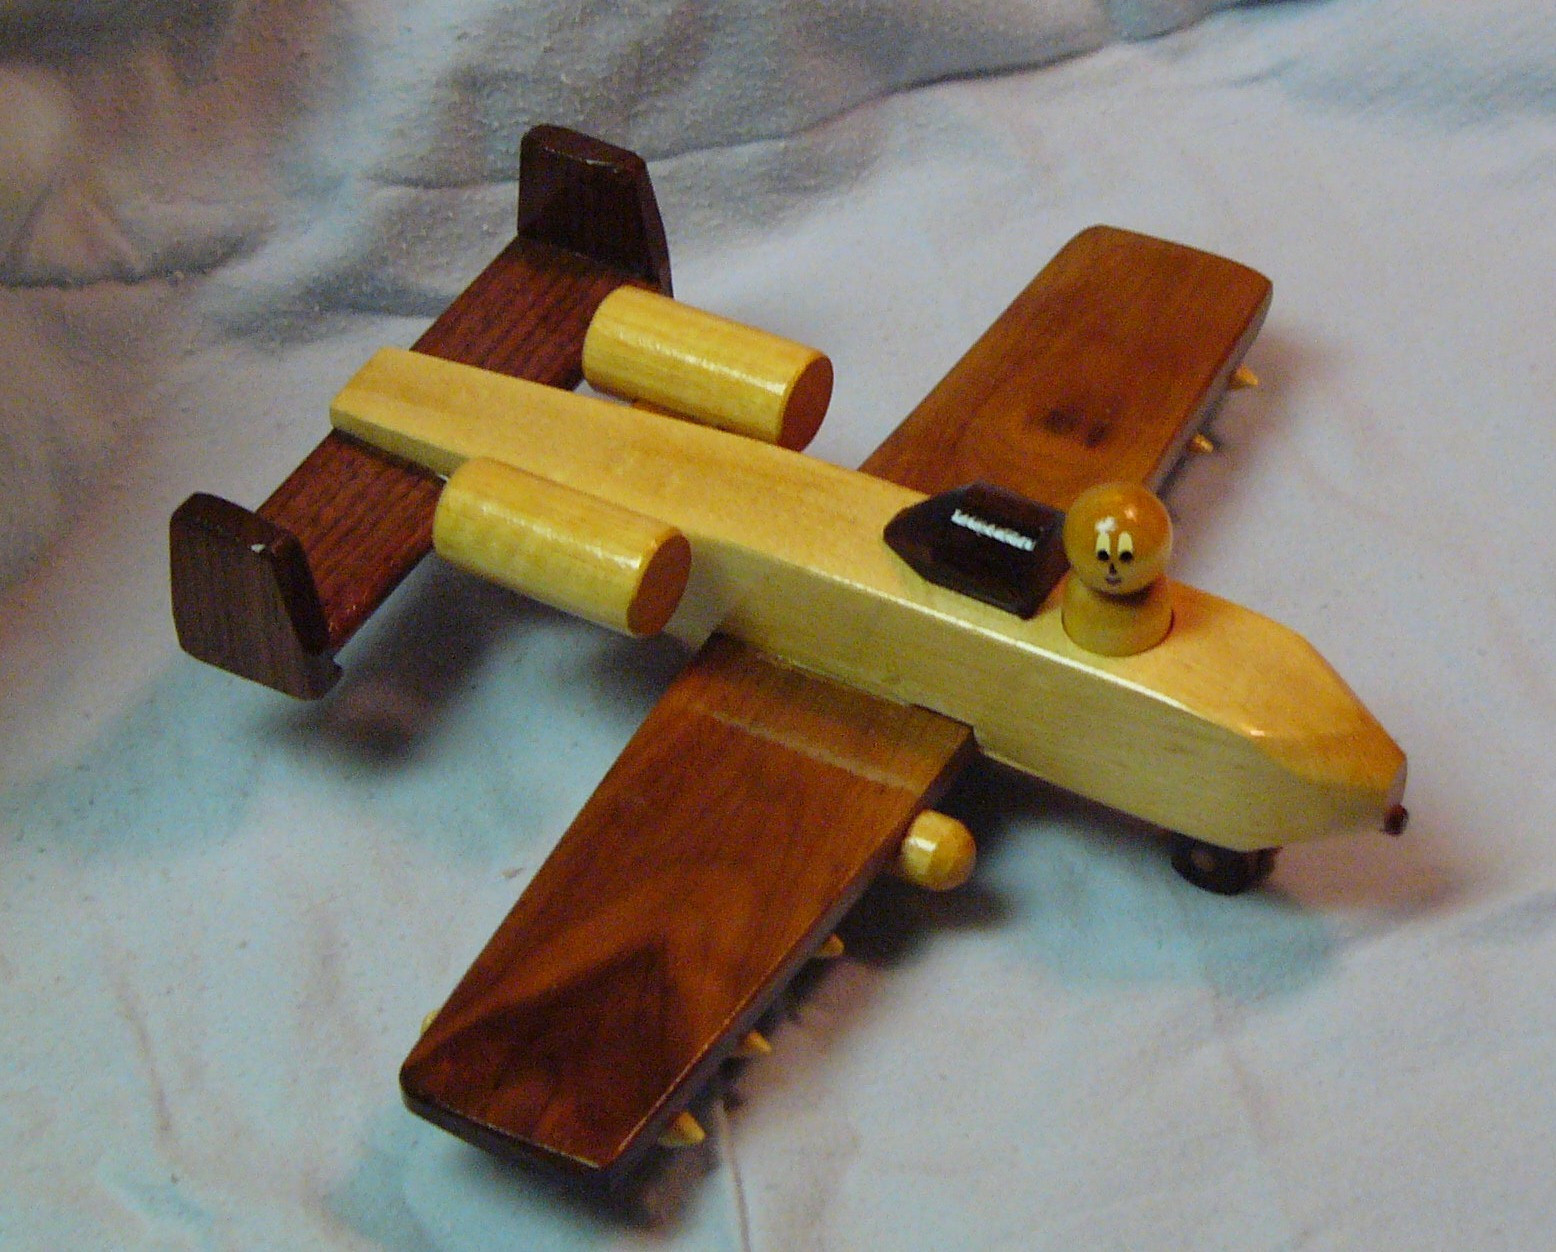 DIY Wooden Toys Plans
 Wood Airplane Plans easy woodshop projects DIY PDF Plans